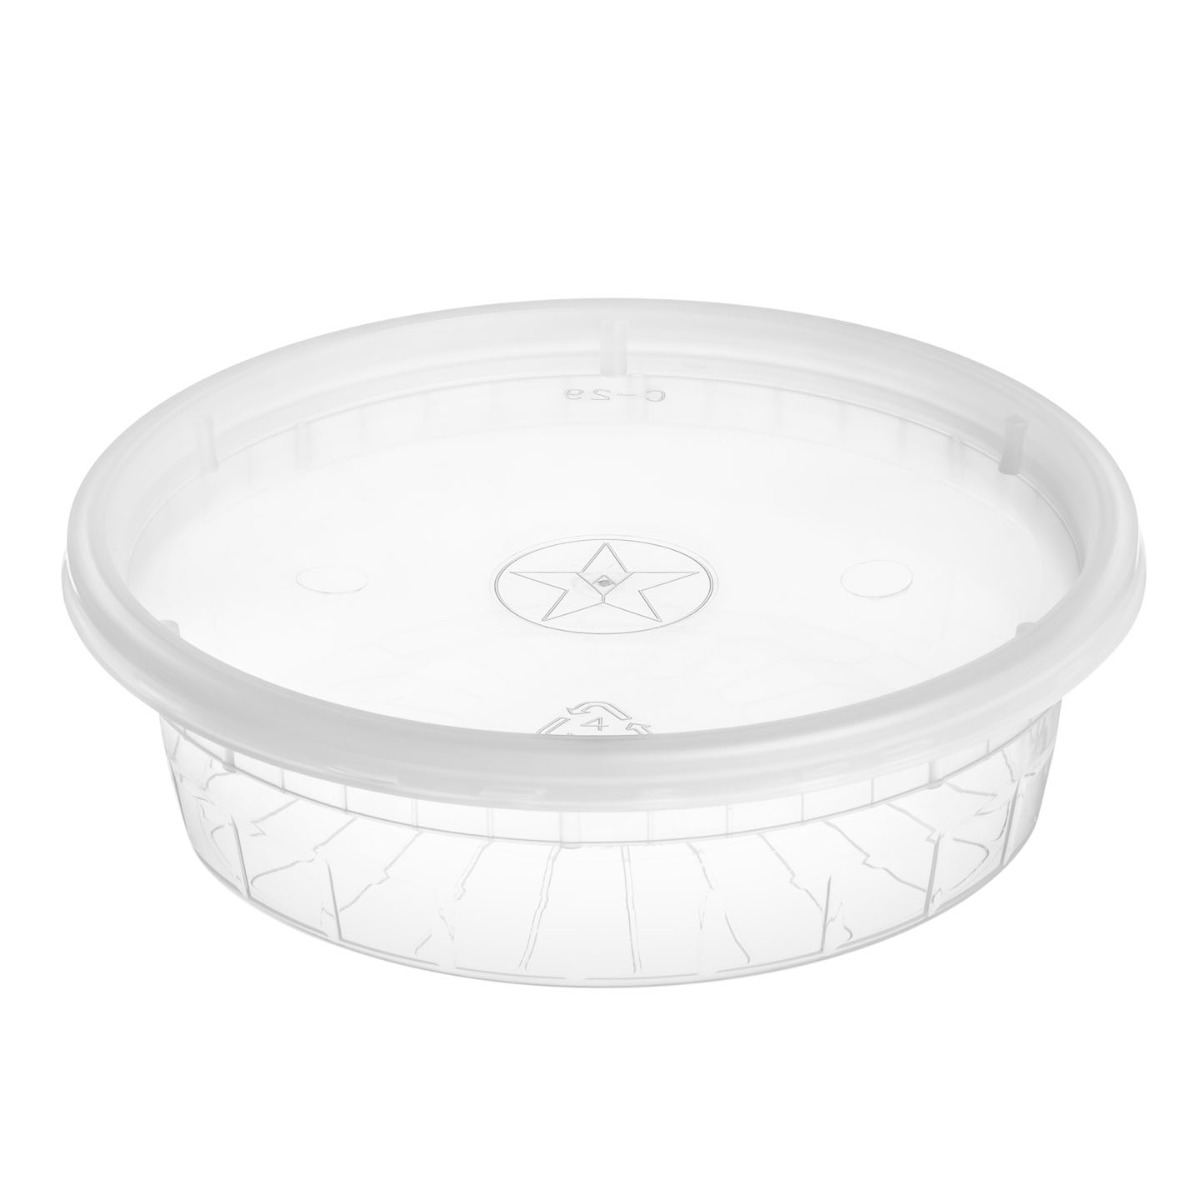 24 oz Microwavable Soup Container with Lids 240 Set